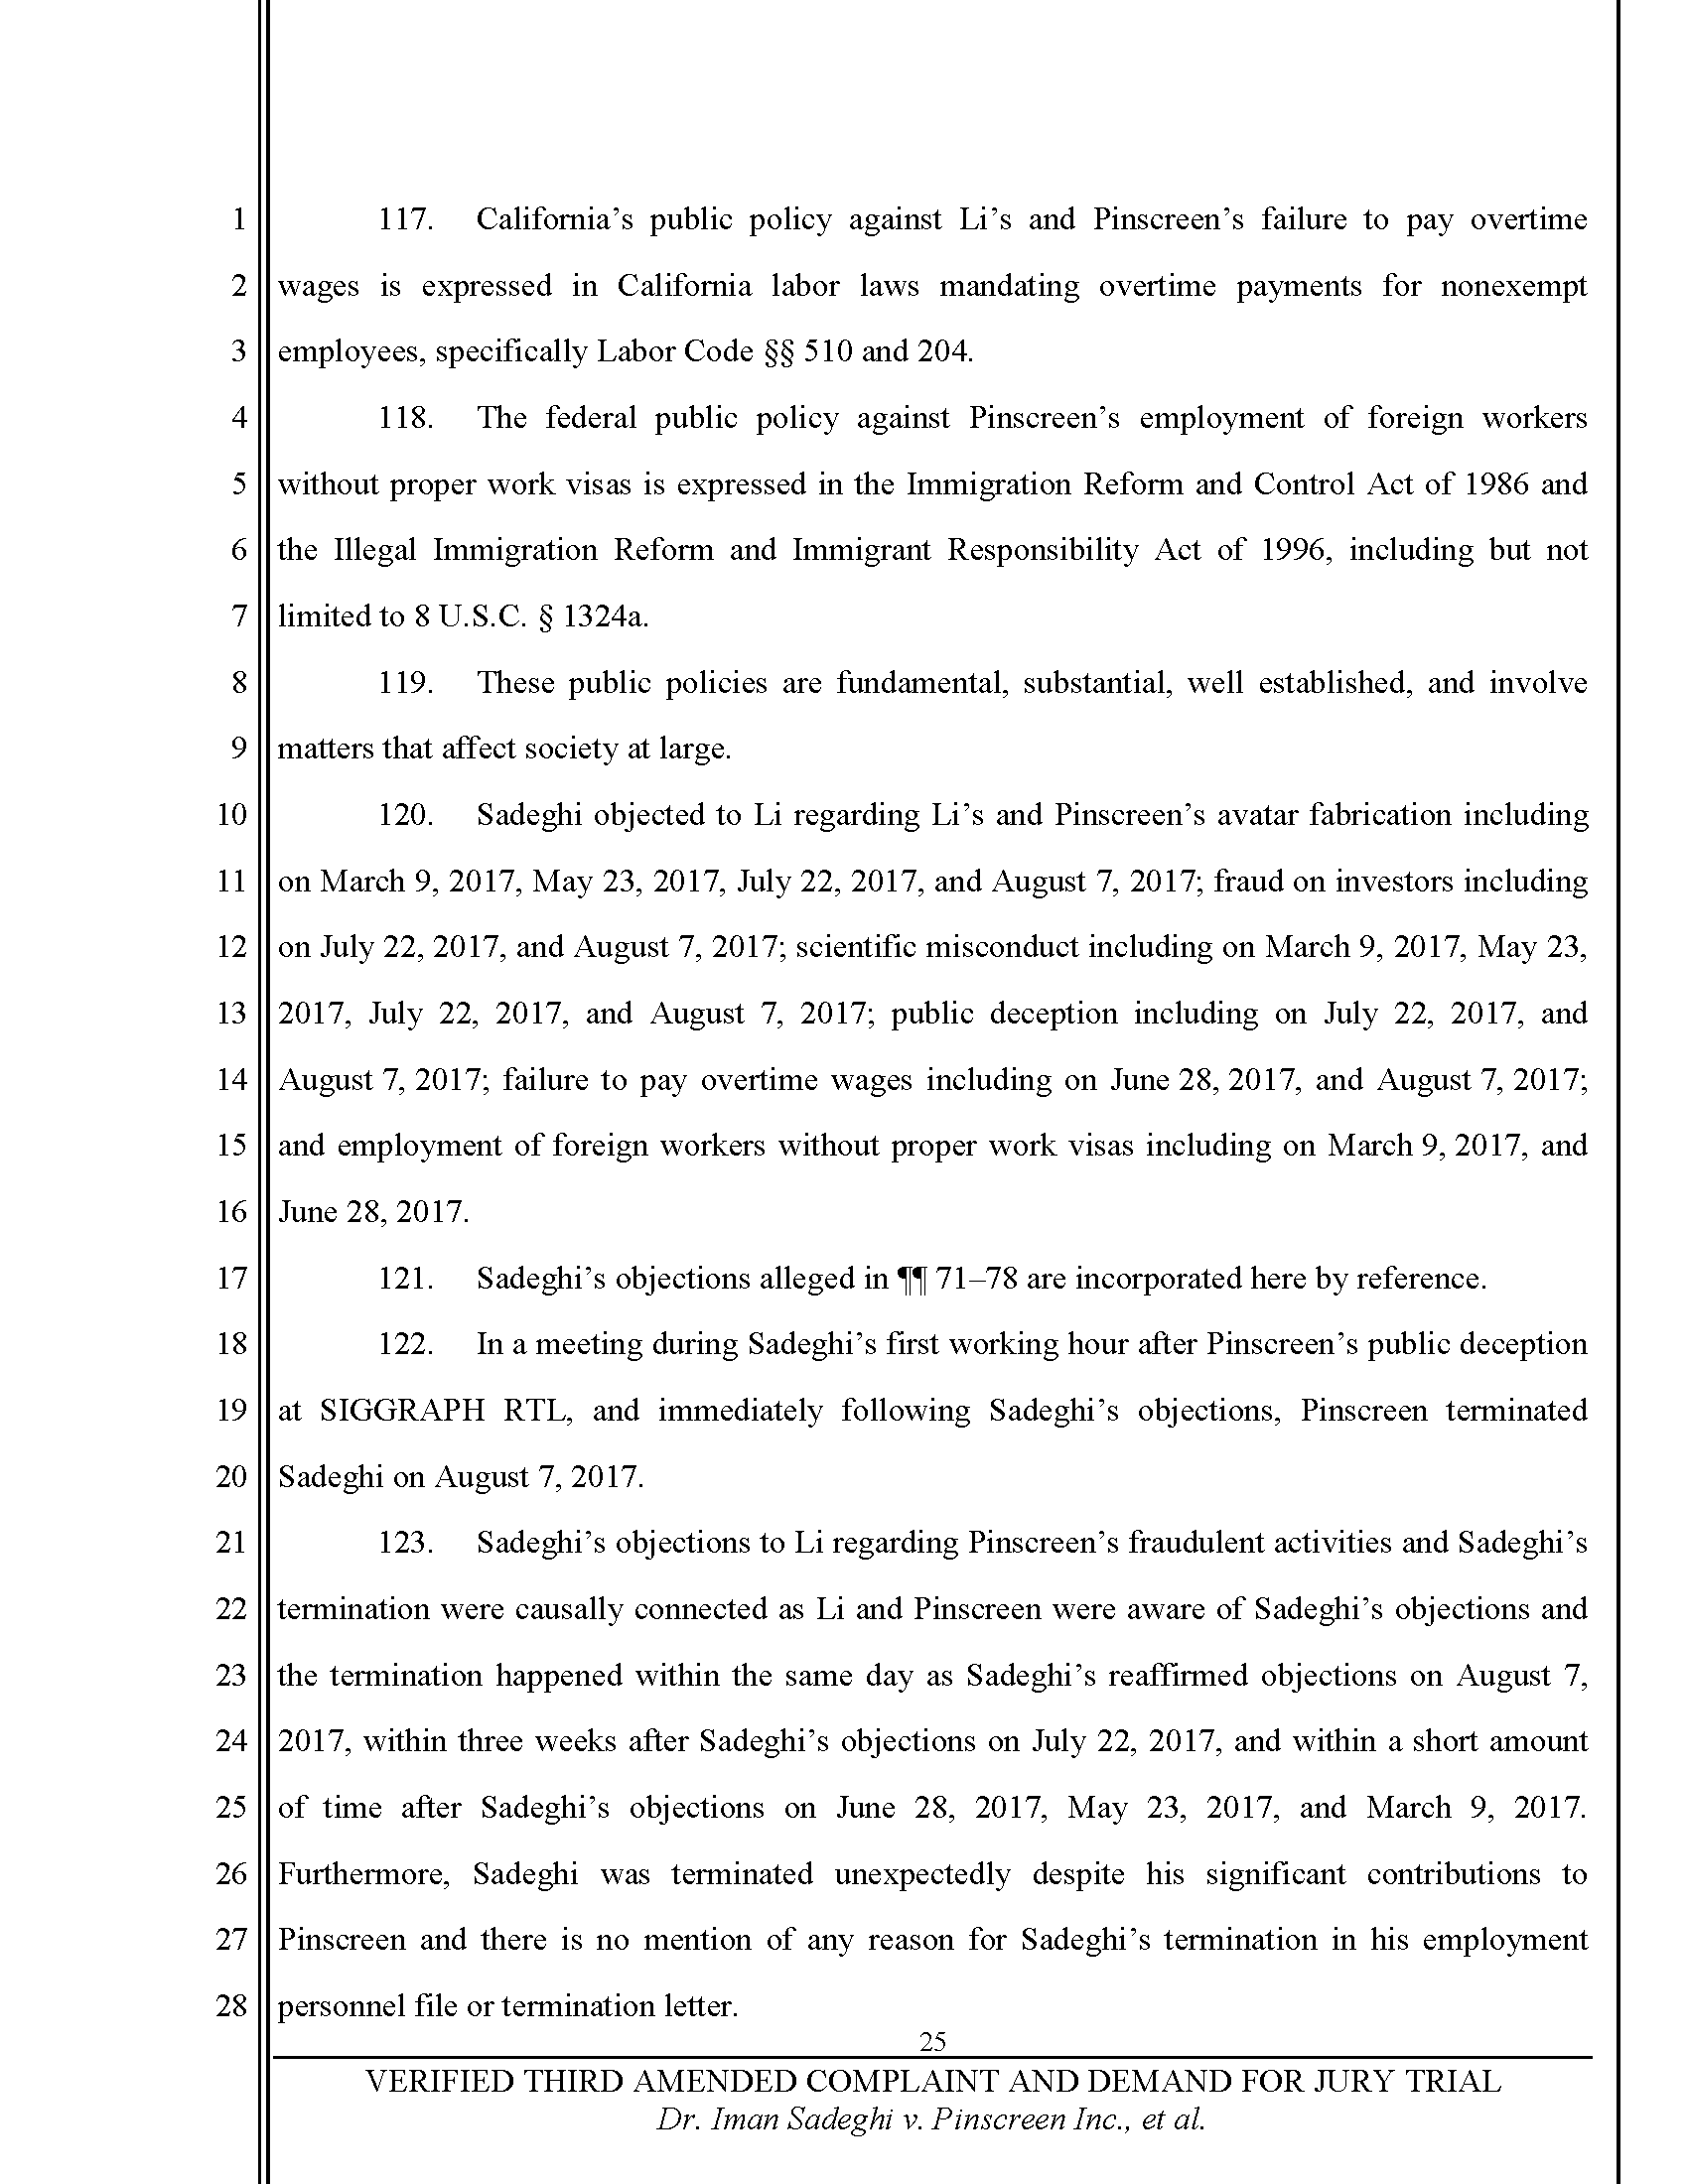 Third Amended Complaint (TAC) Page 26